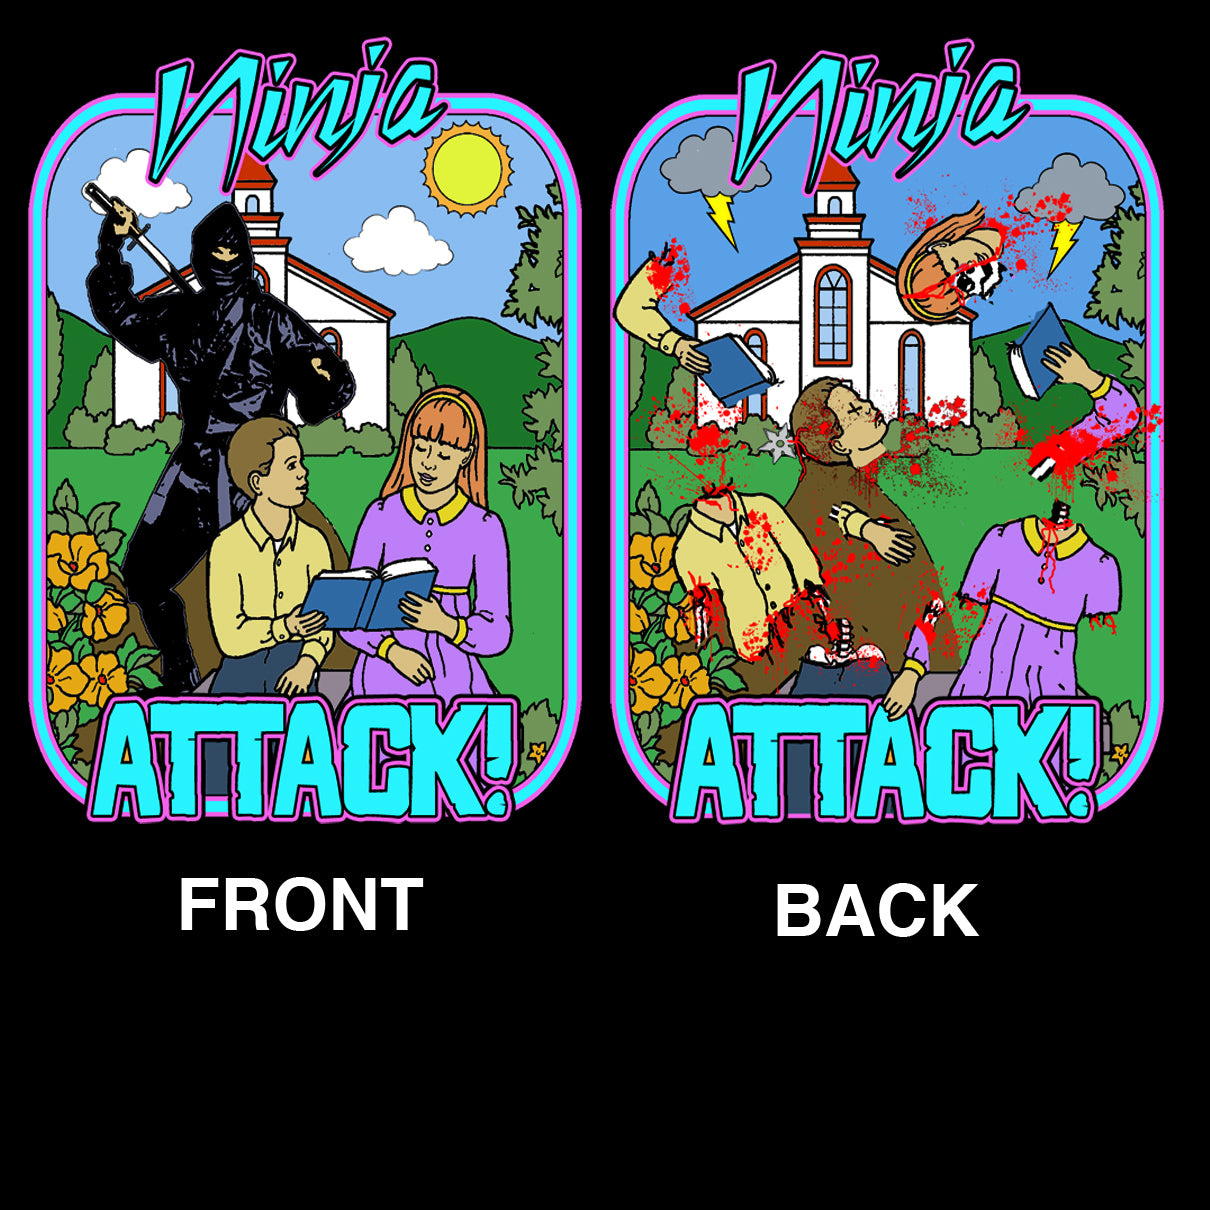 Ninja Attack! Double sided front & back print